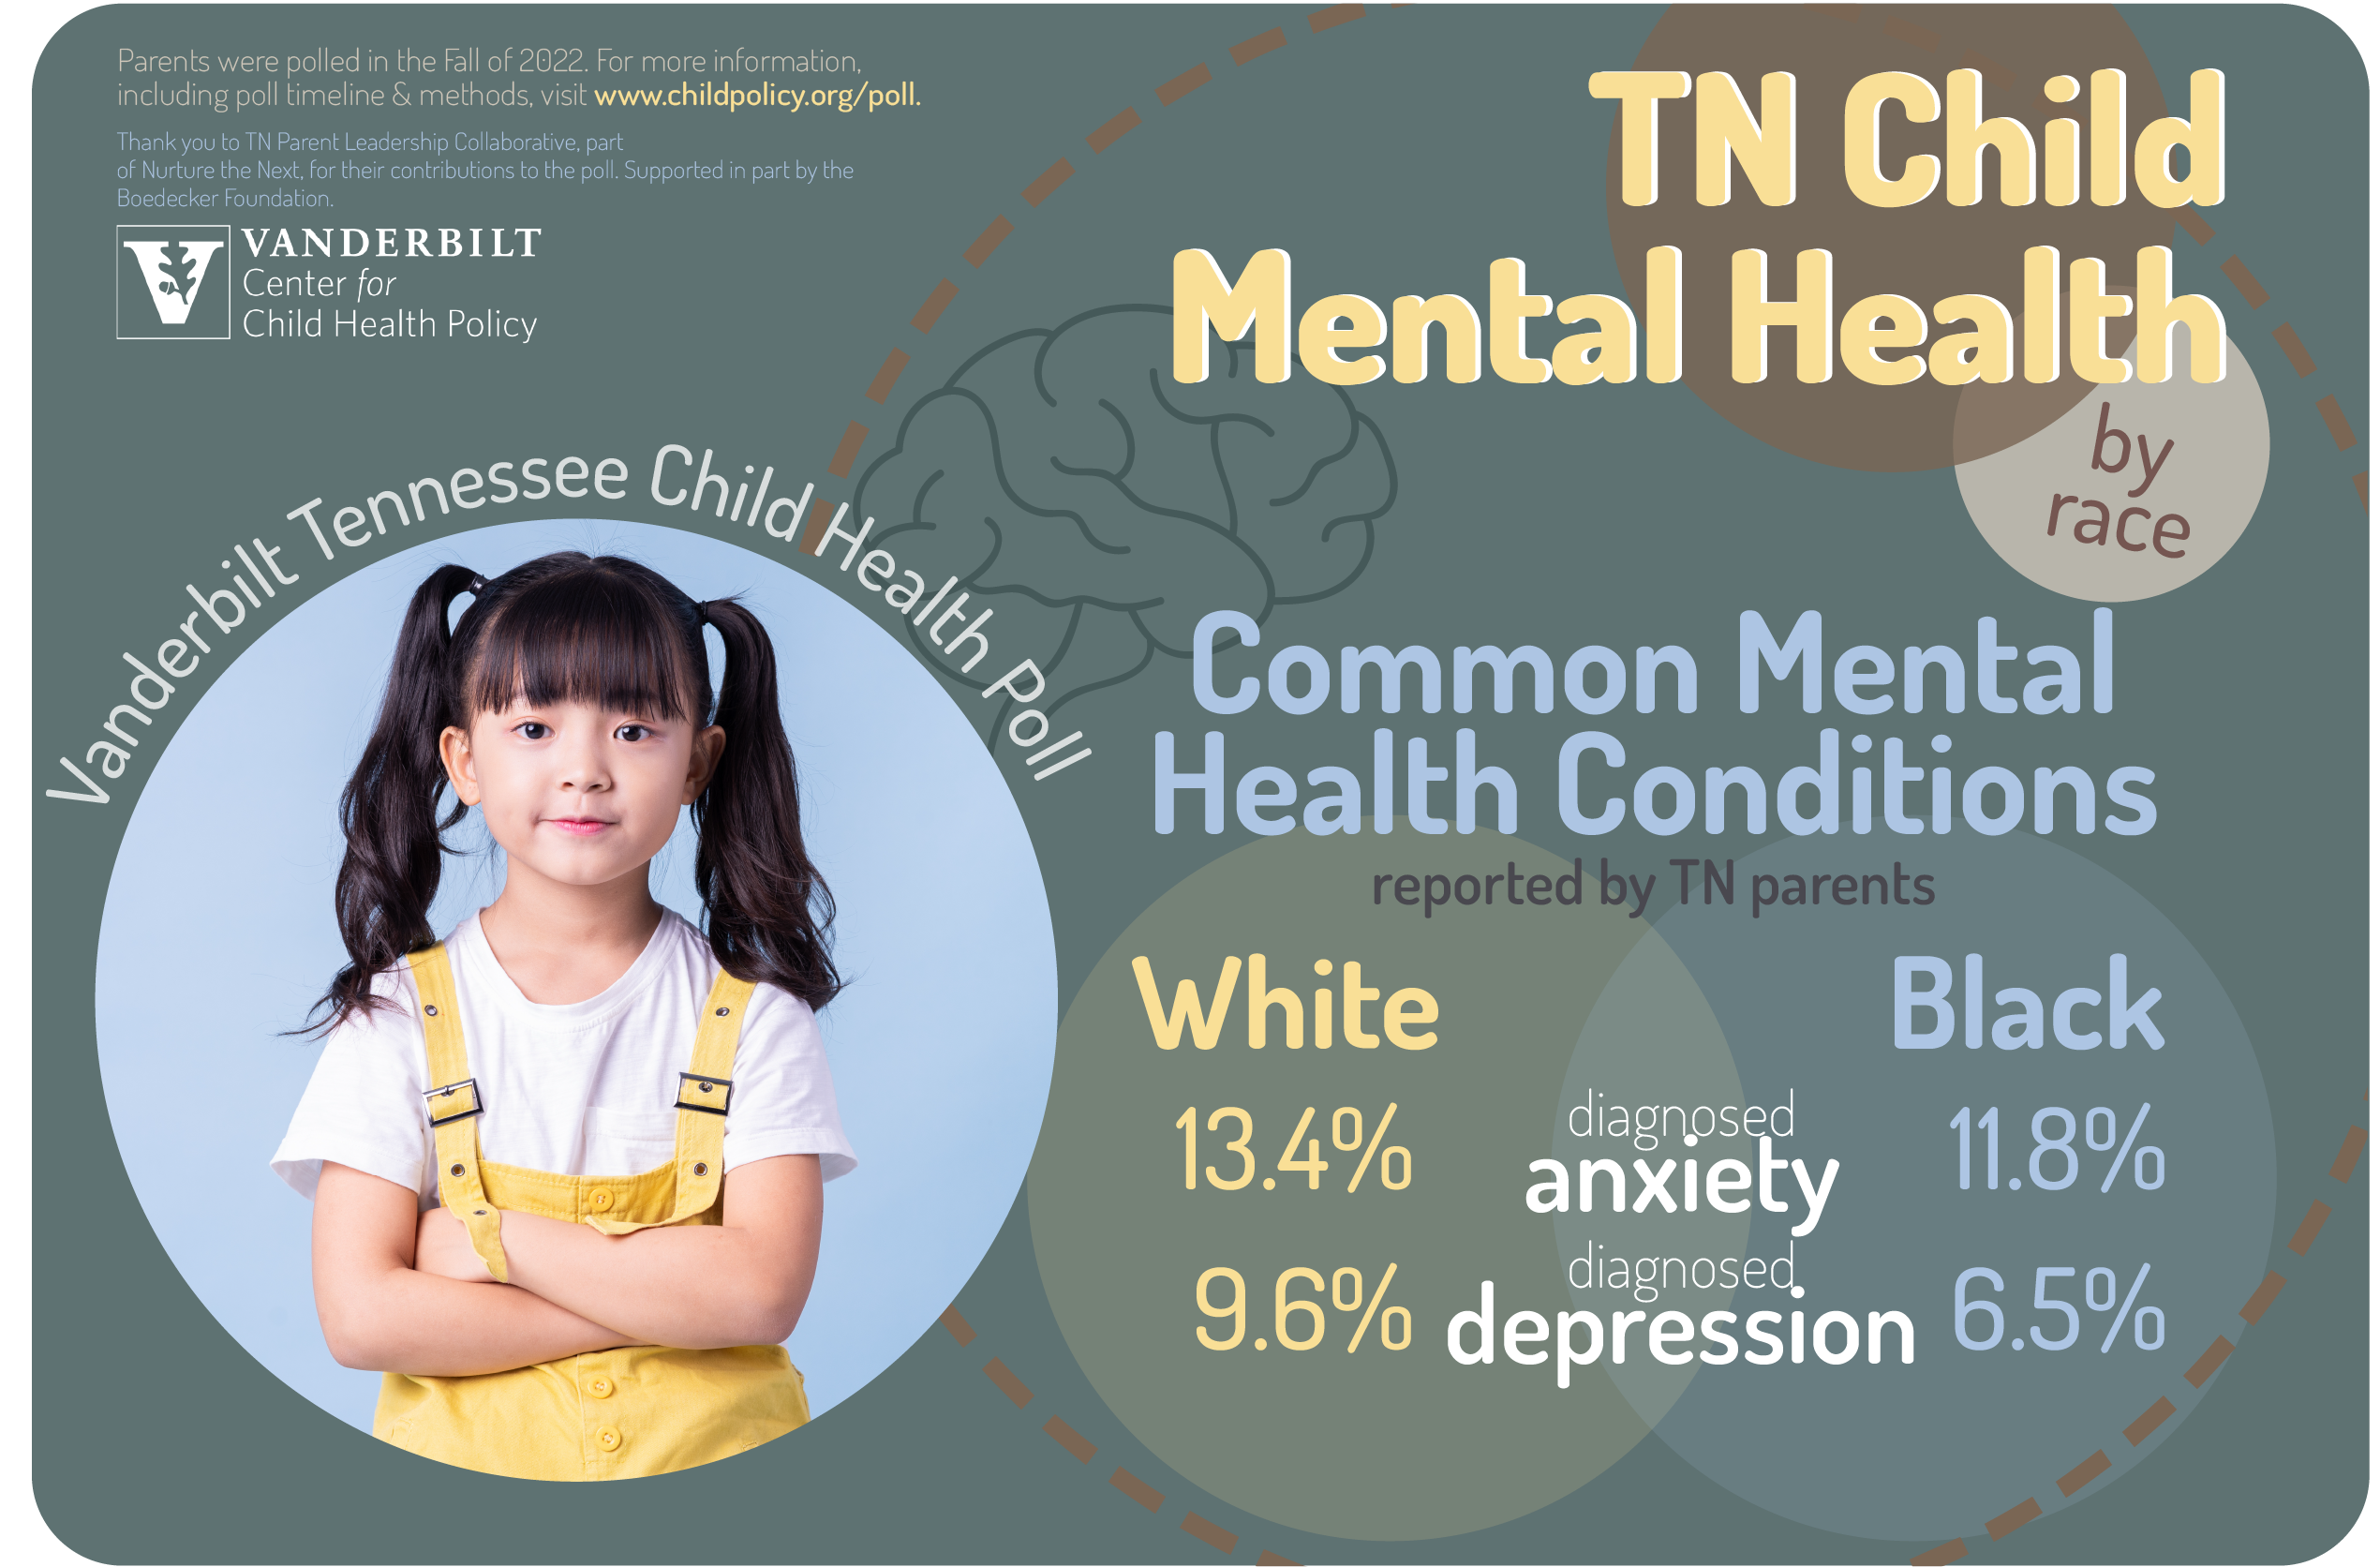 Child Mental Health by race Infographic